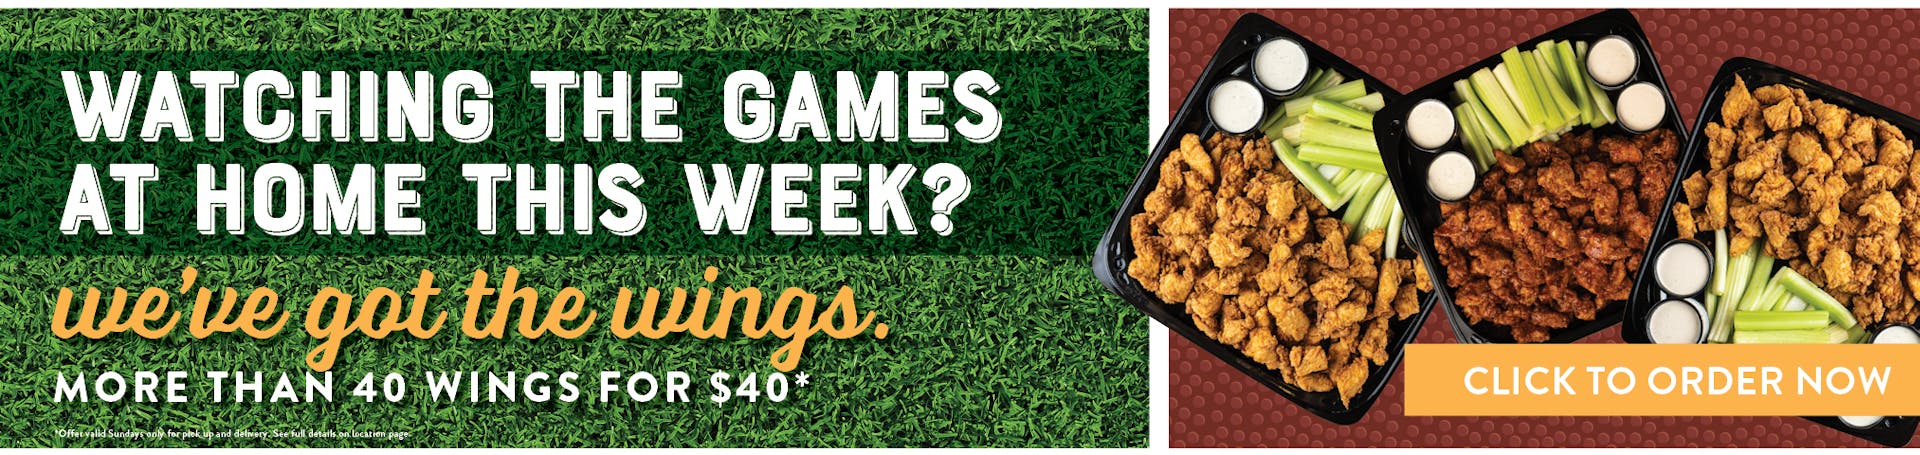 watching the games at home this week? we've got the wings. More than 40 wings for $40*